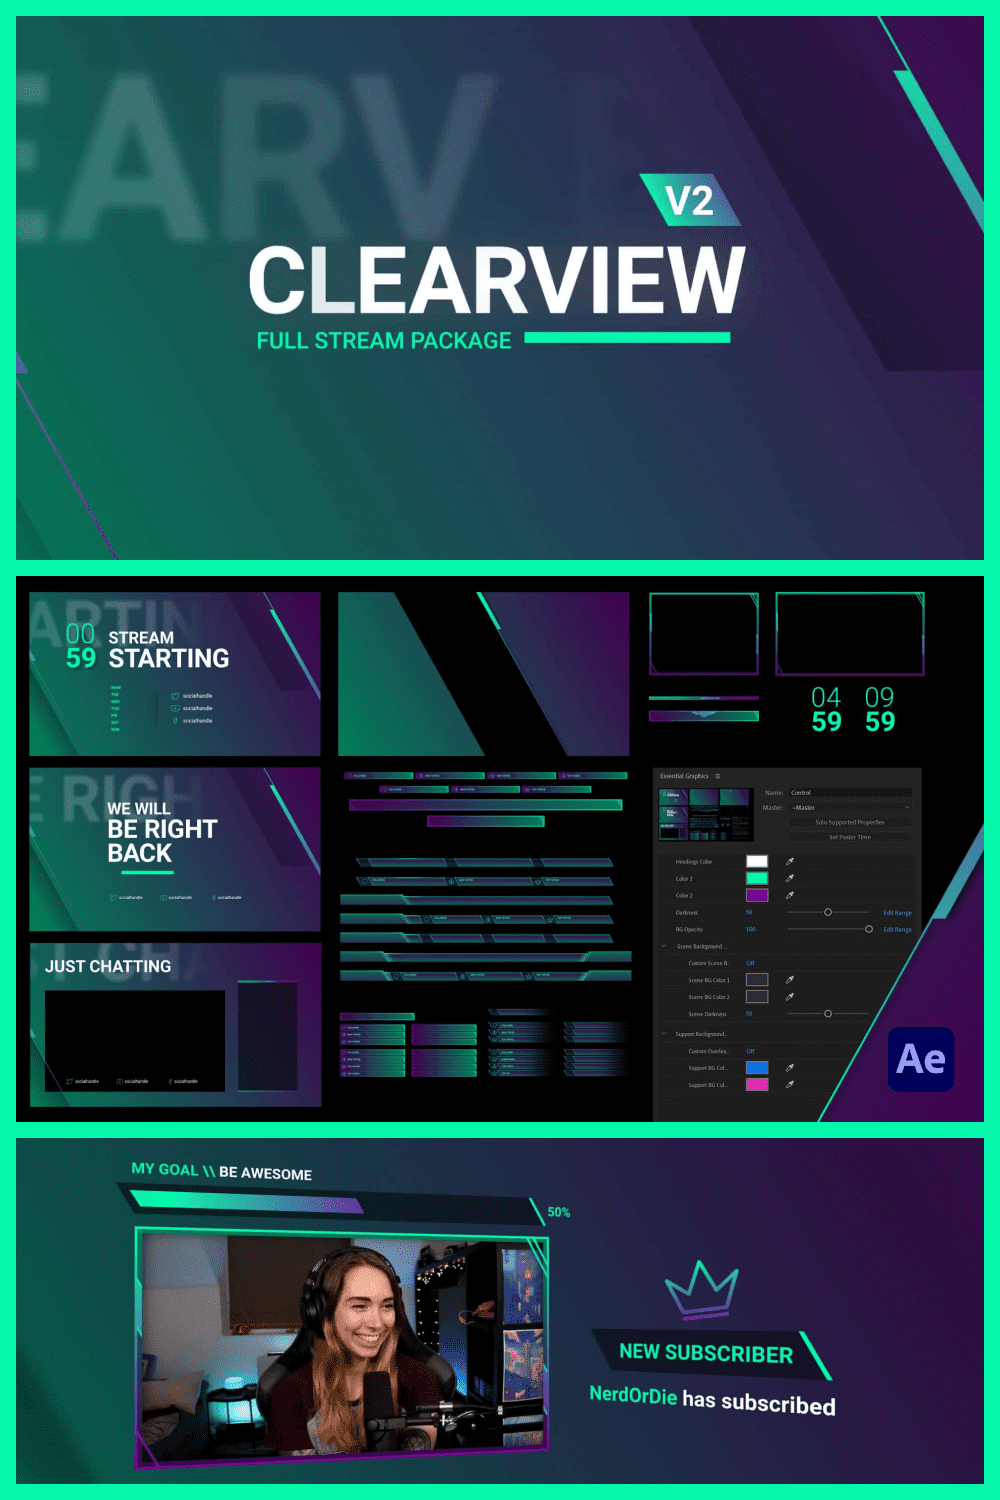 Clearview gives your stream a professional look it deserves with clean overlays, alerts, goal widgets and more that are easily adaptable to most games and applications.